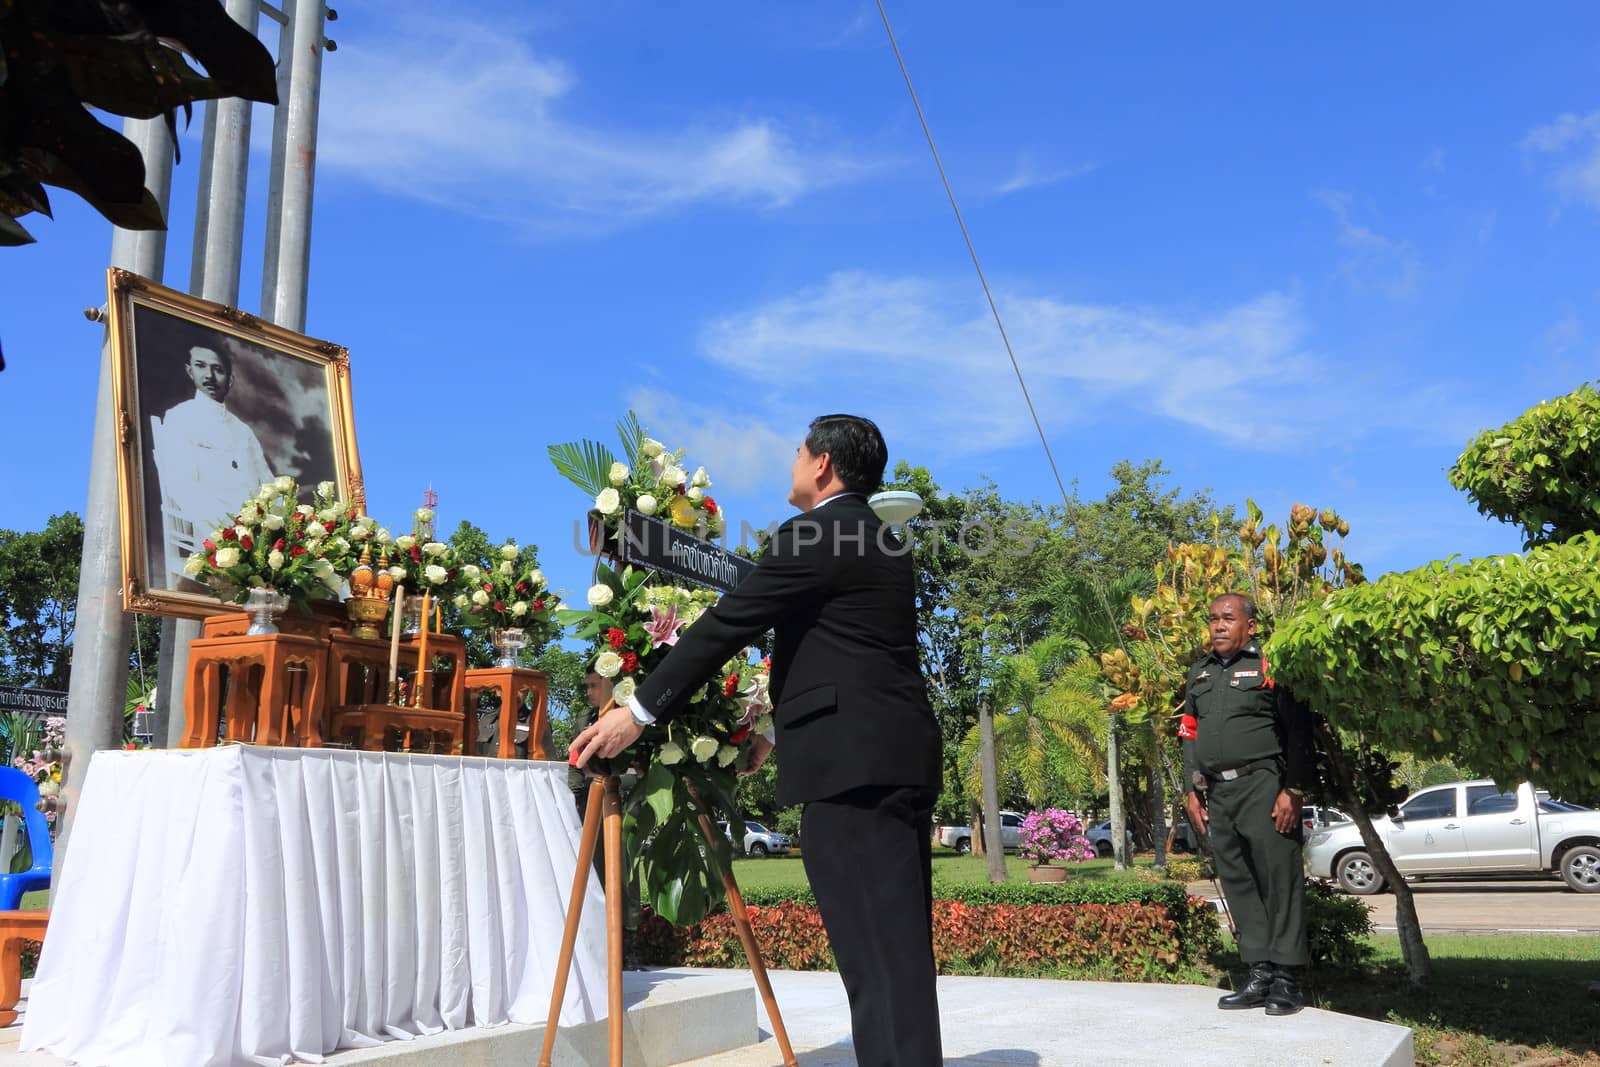 SURAT THANI, THAILAND - AUGUST 7 : Mr.Wichai Detchutipong Chief Judge of Chiya provincial court lay wreath to the picture of Rapee Pattanasak on Rapee Day Prince Rapee Pattanasak, the father of Thailand's modern legal system on August 7, 2013 in Surat Thani, Thailand.